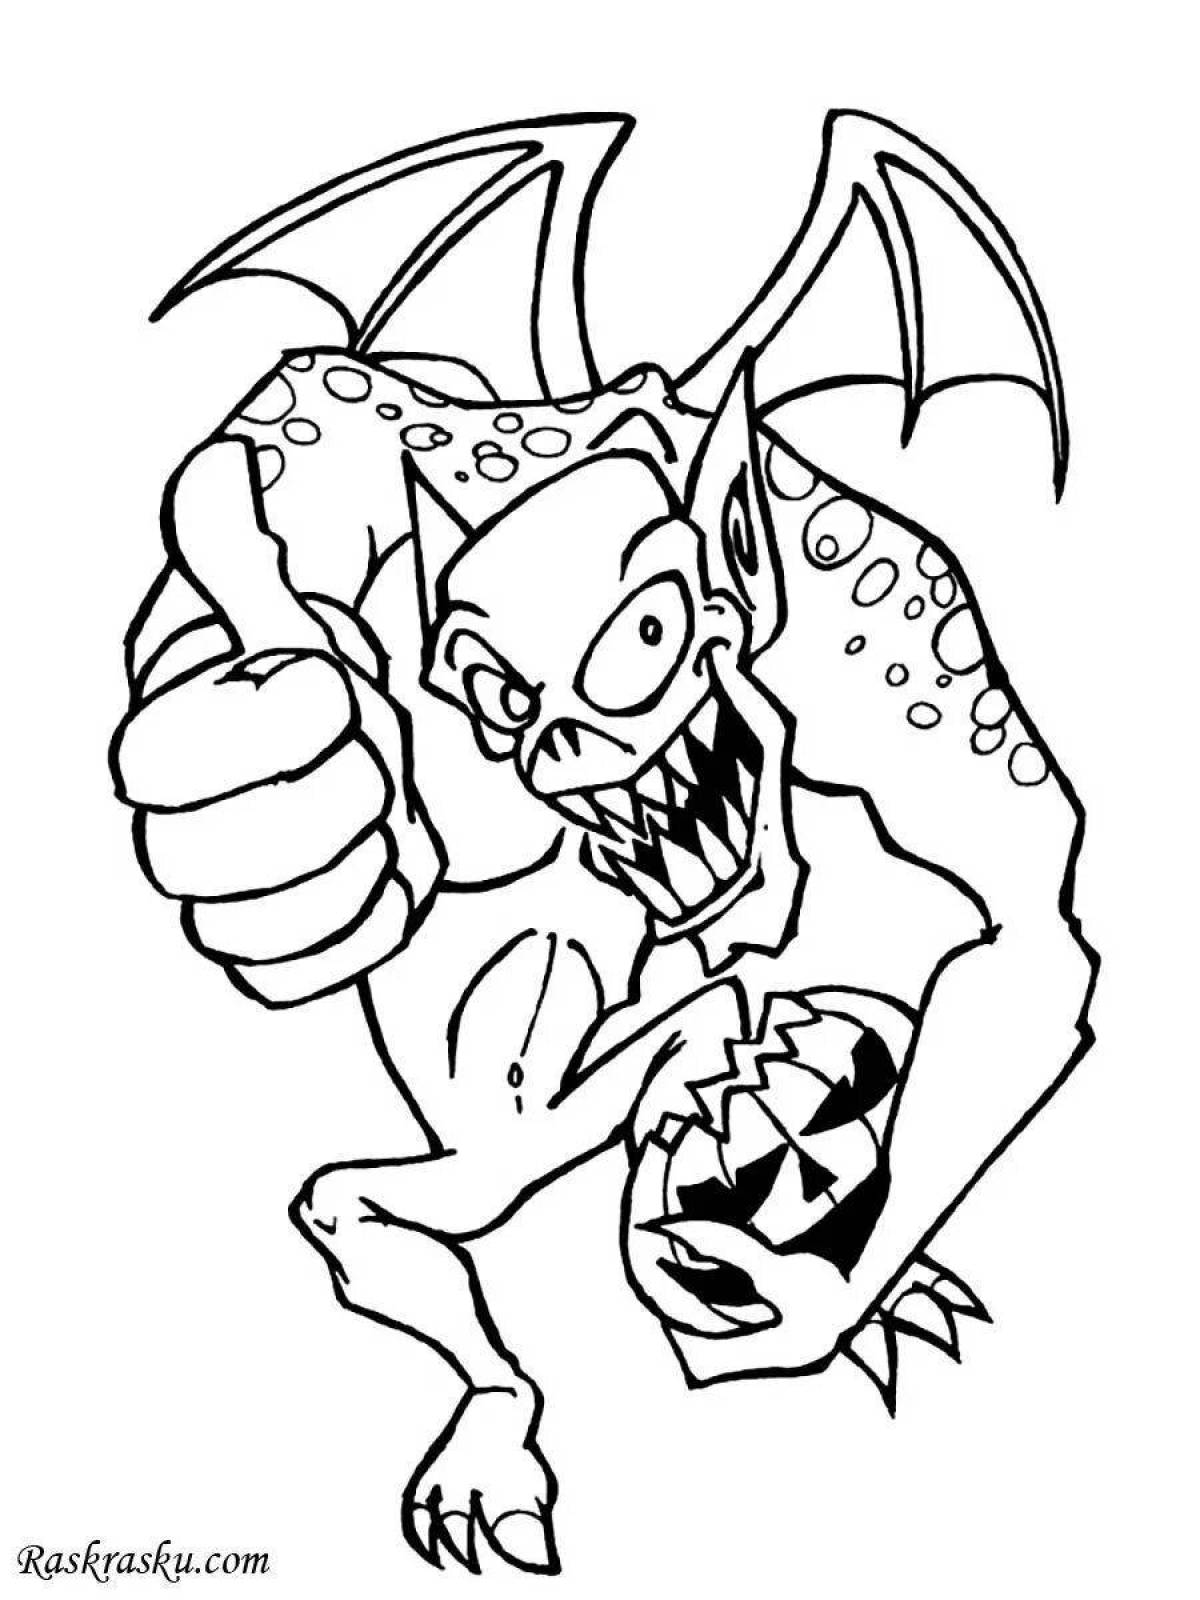 Charming monsters baby coloring book